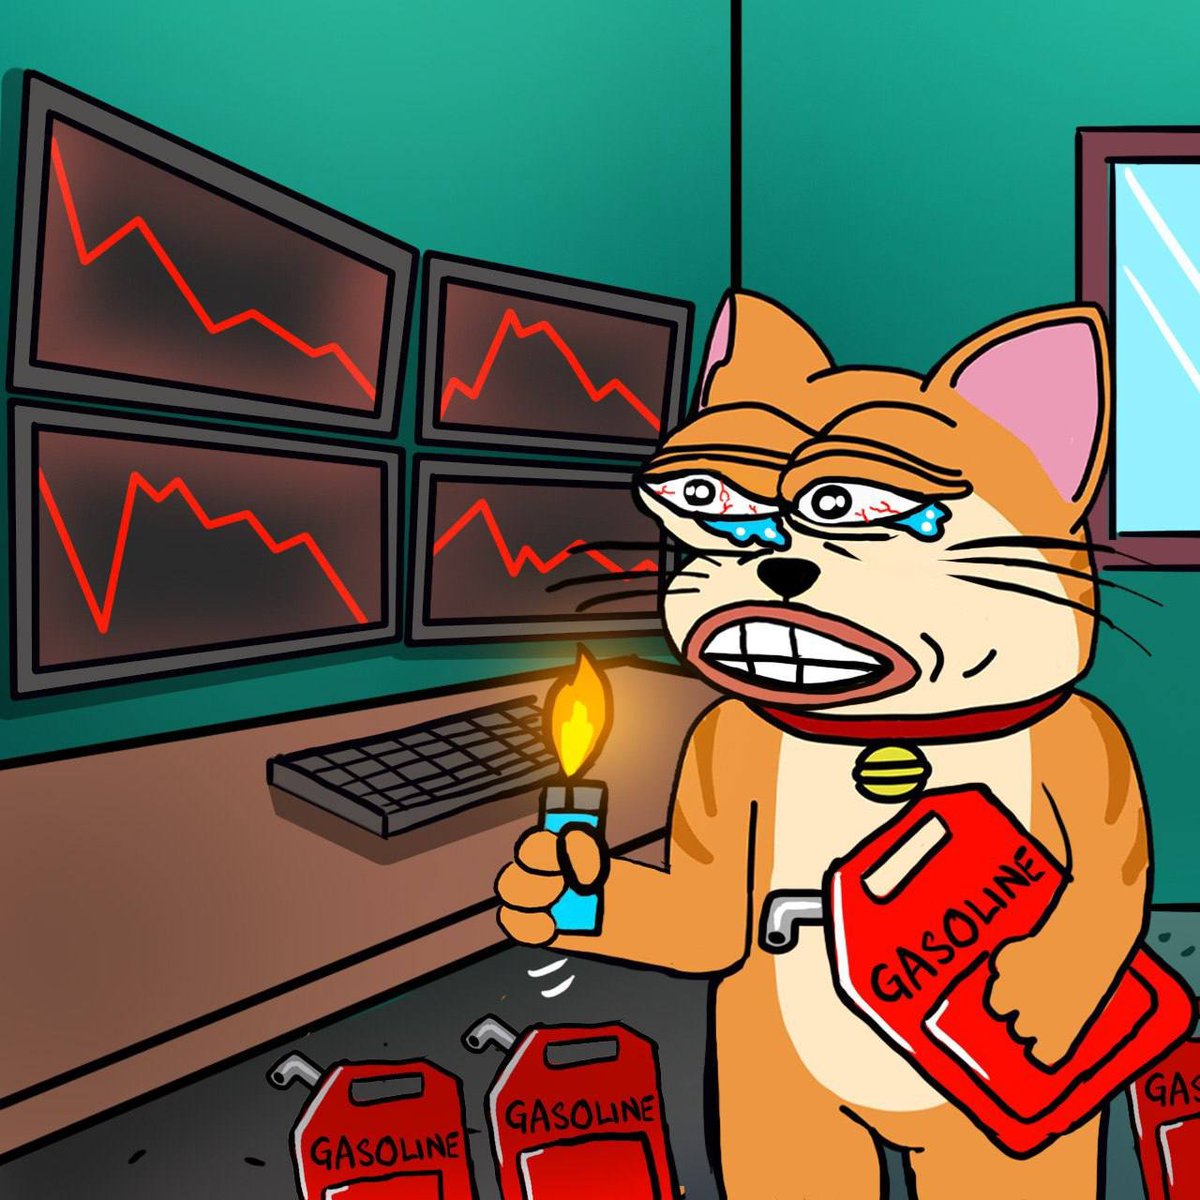 $TOPPY | @toppysol on Sol Launching today! 🗓29th May 14:35 UTC! 📌 $TOPPY is a cat with a meme coin addiction. He's a very bad trader with severe anger issues! Fair Launch: No Presale /No Tax/ Ca Renounced / Lp burned! 🌐toppy-sol.fun 🗨t.me/toppysol